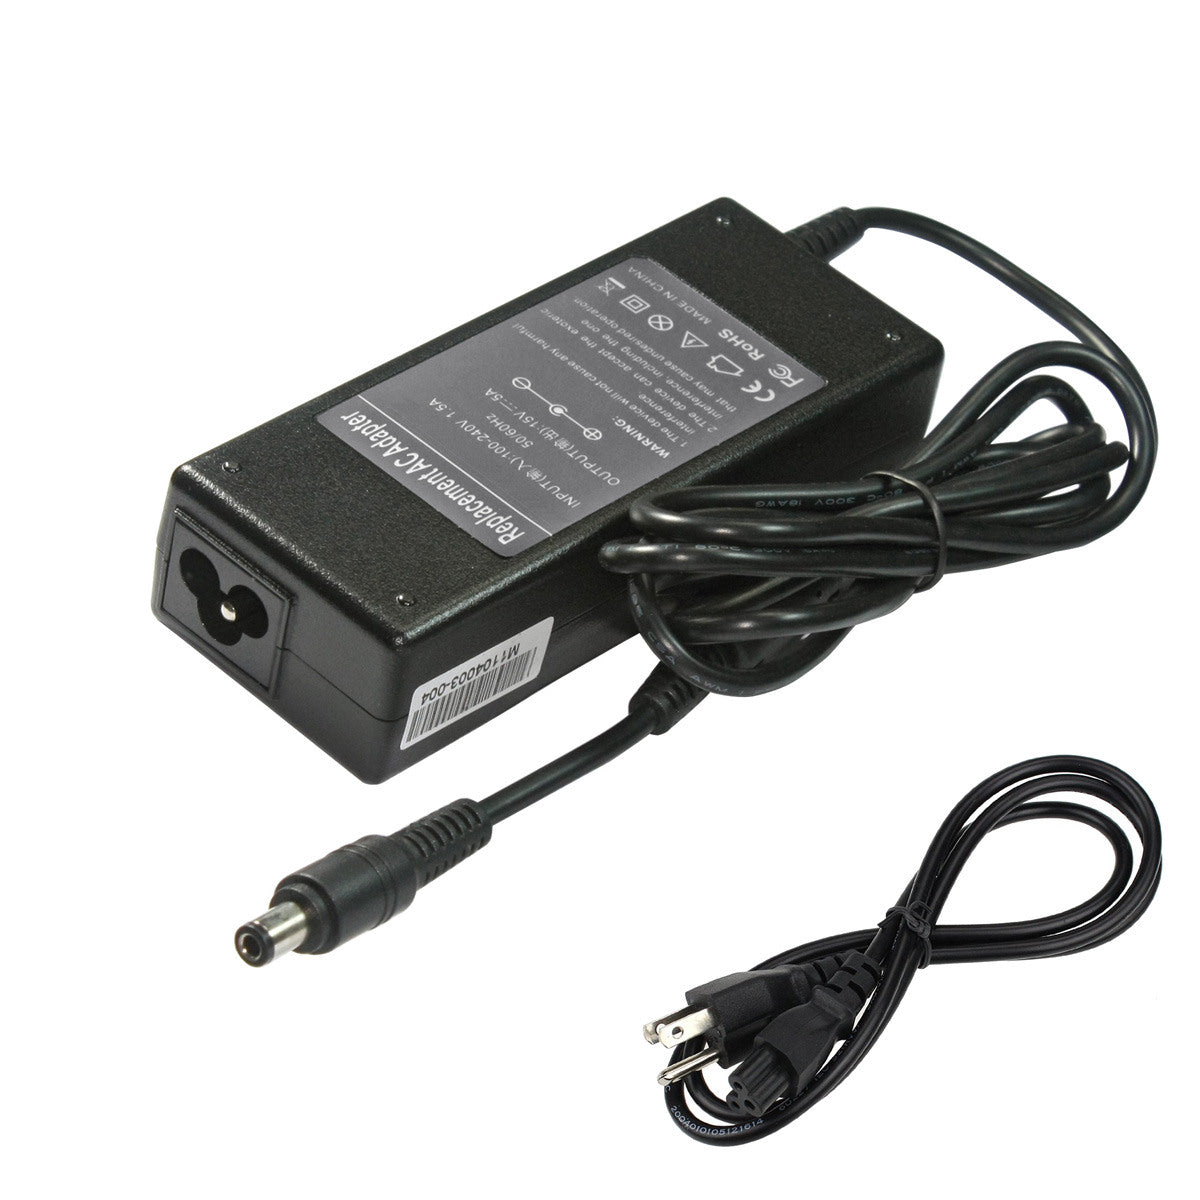 Compatible Replacement Toshiba PA3153U-1ACA Laptop Charger.